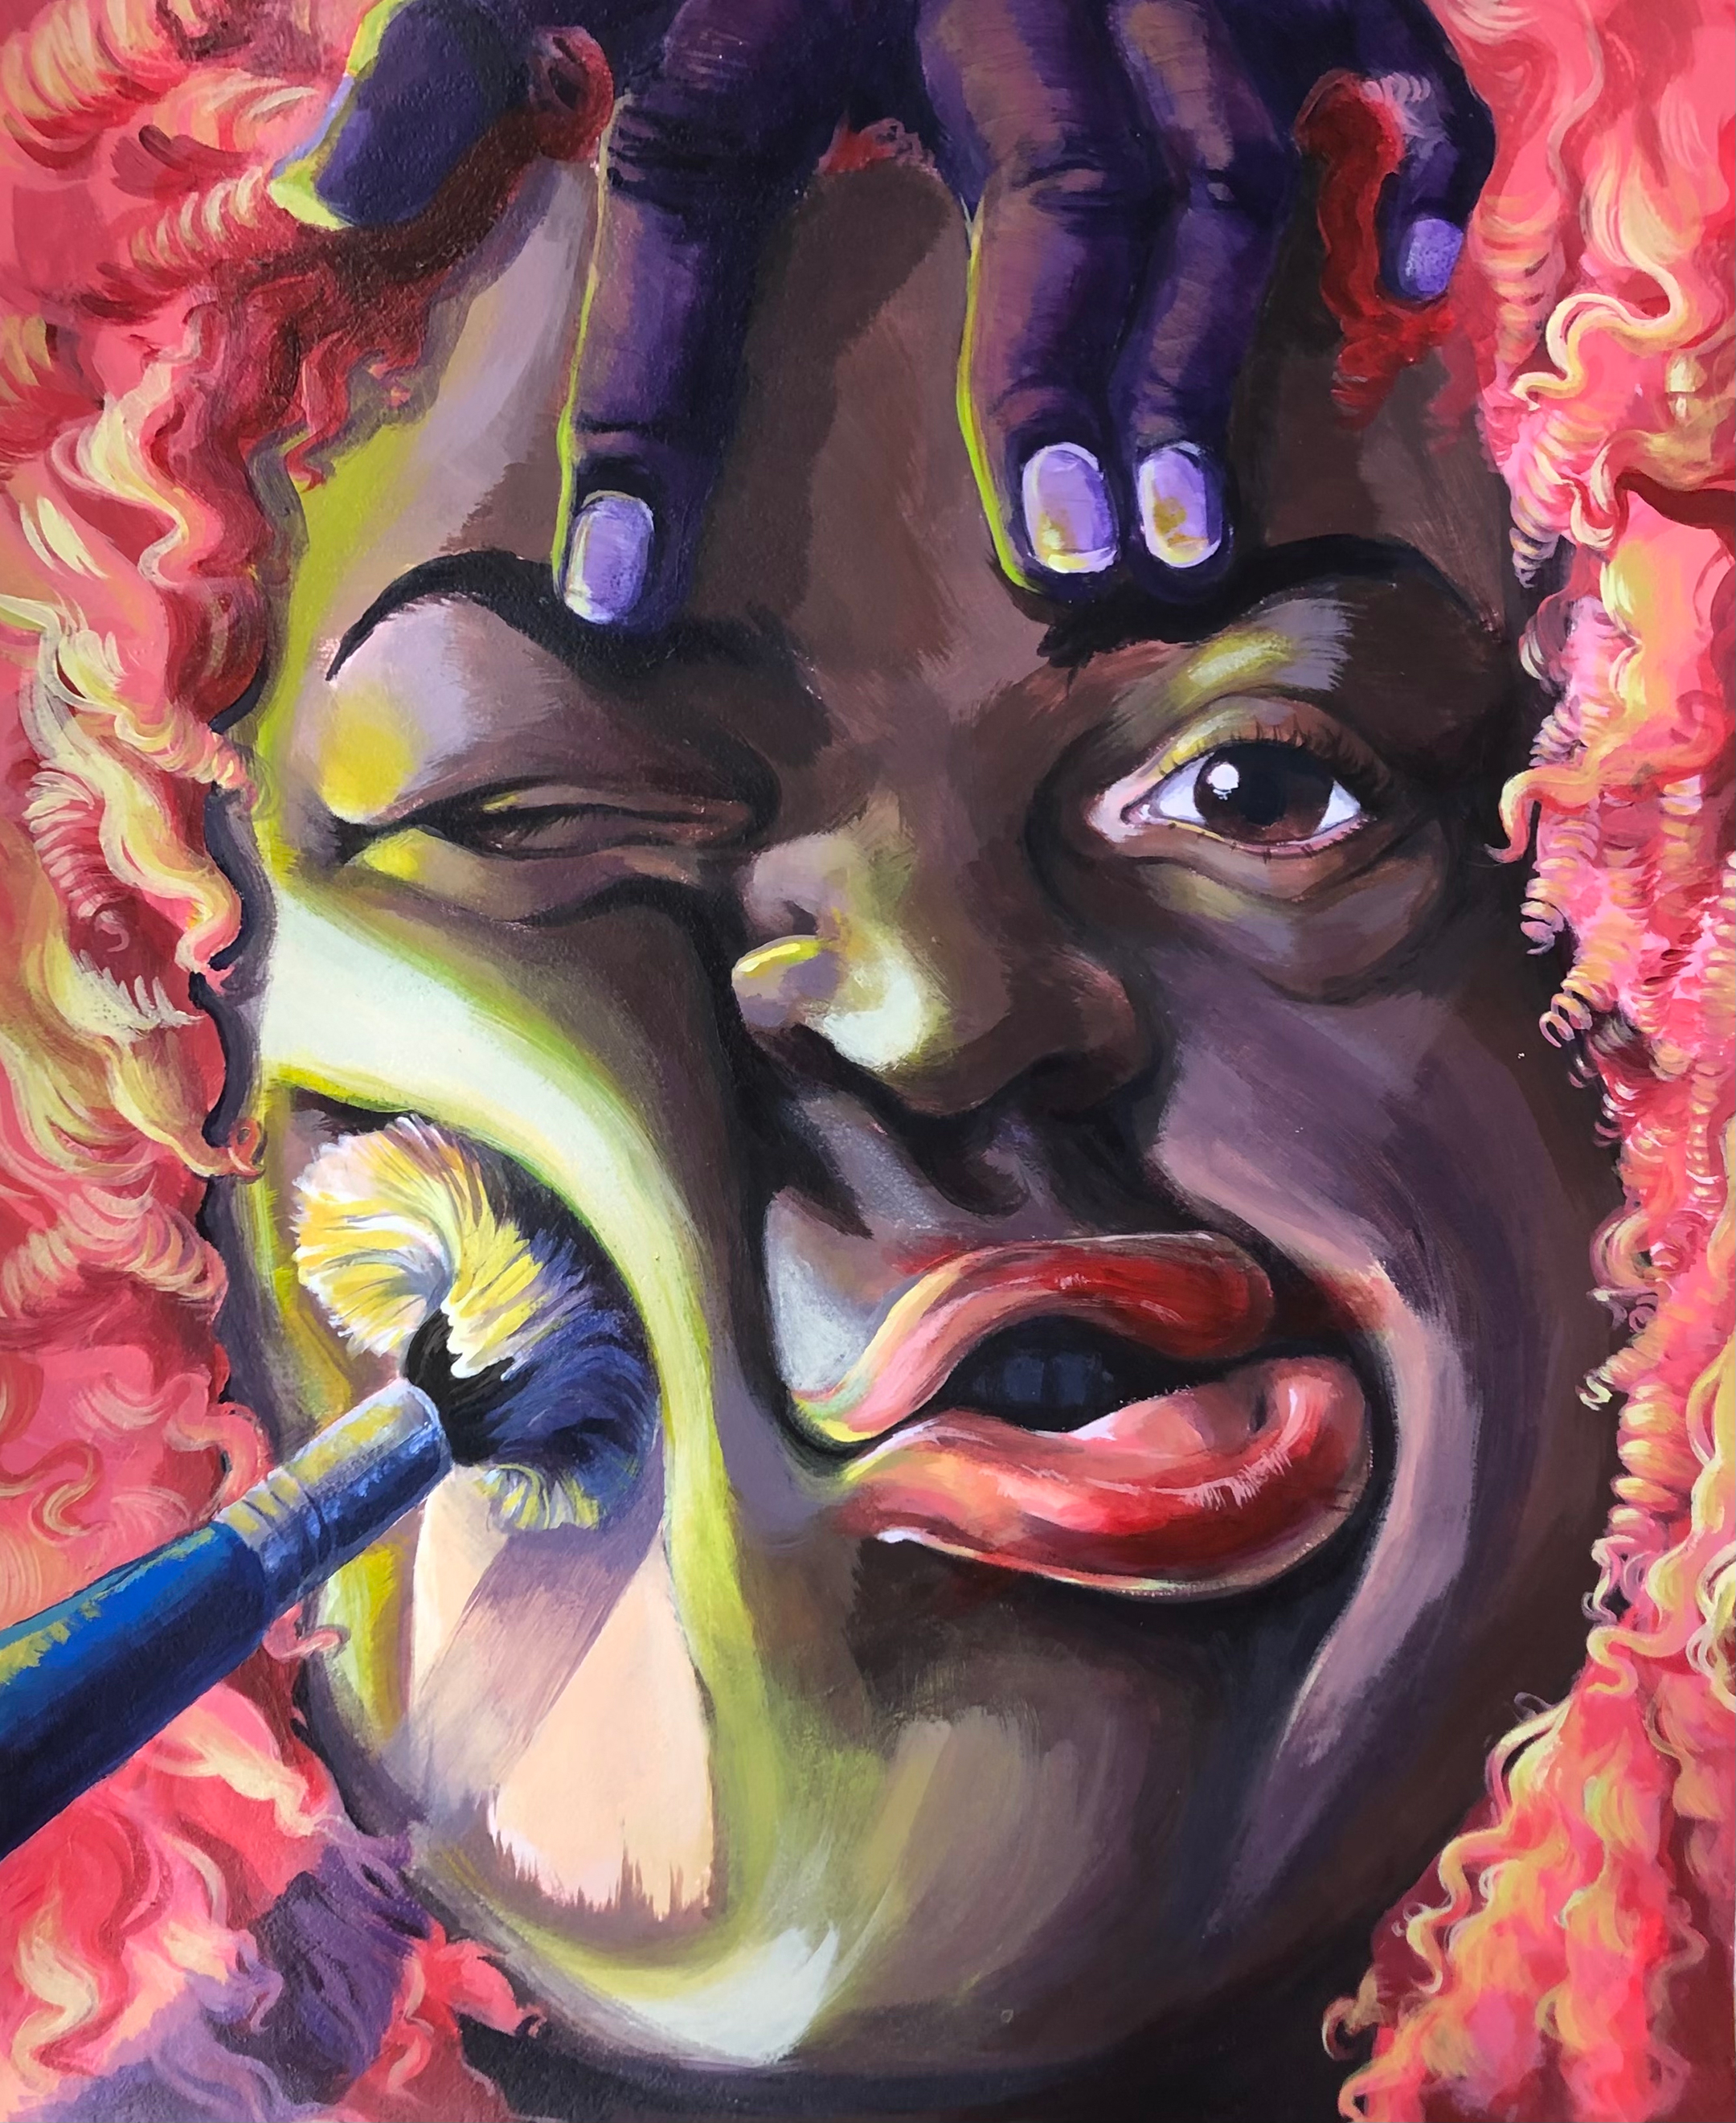 Illustration of a young black woman's face being manipulated by a hand holding her head and a makeup brush on her cheek